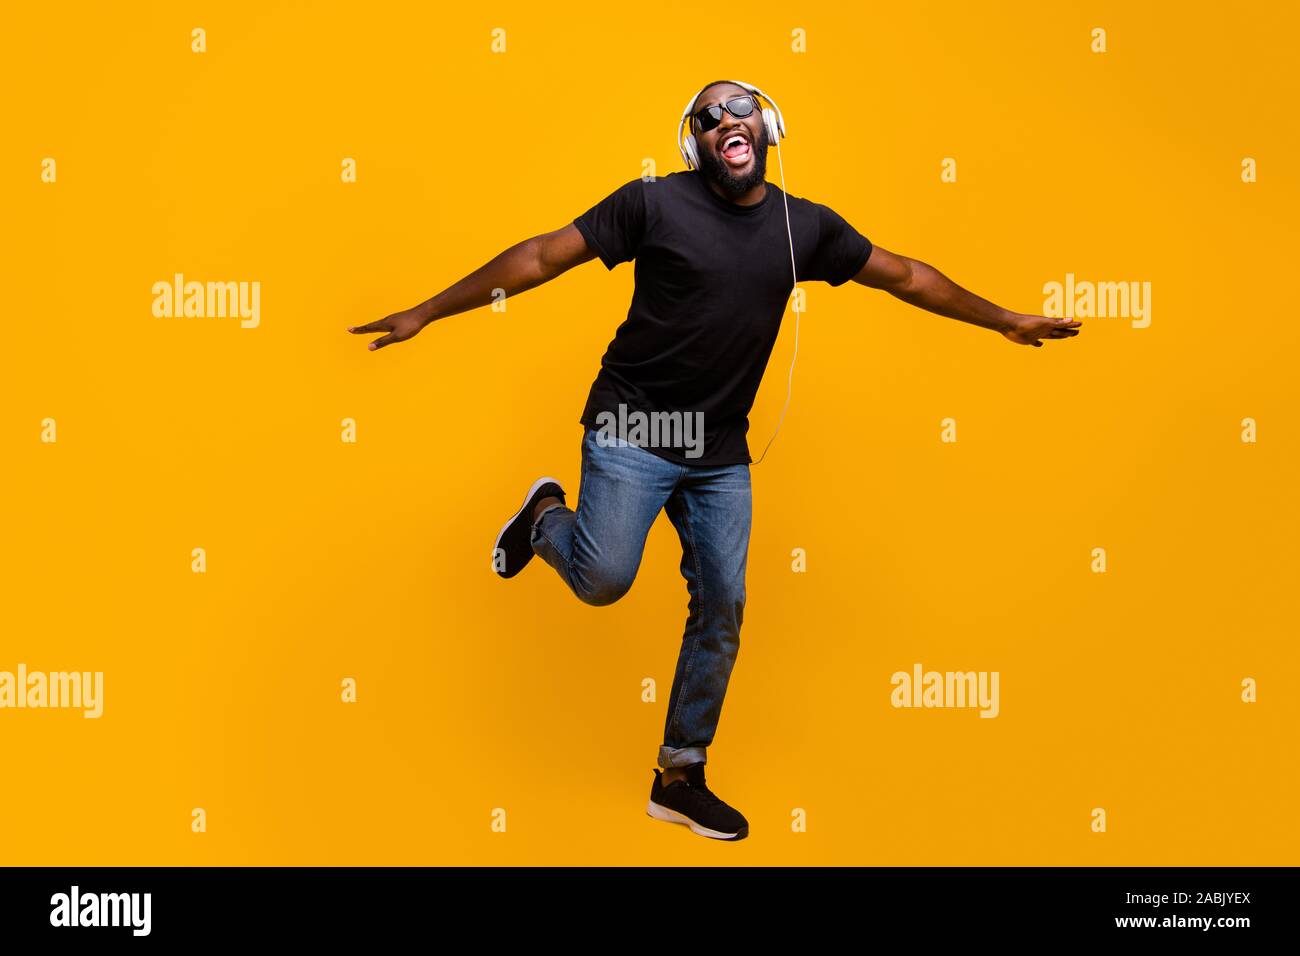 I believe can fly. Full size phtoo of funny positive afro american guy listen music with headset sing song raise hands like birds wings wear t-shirt Stock Photo